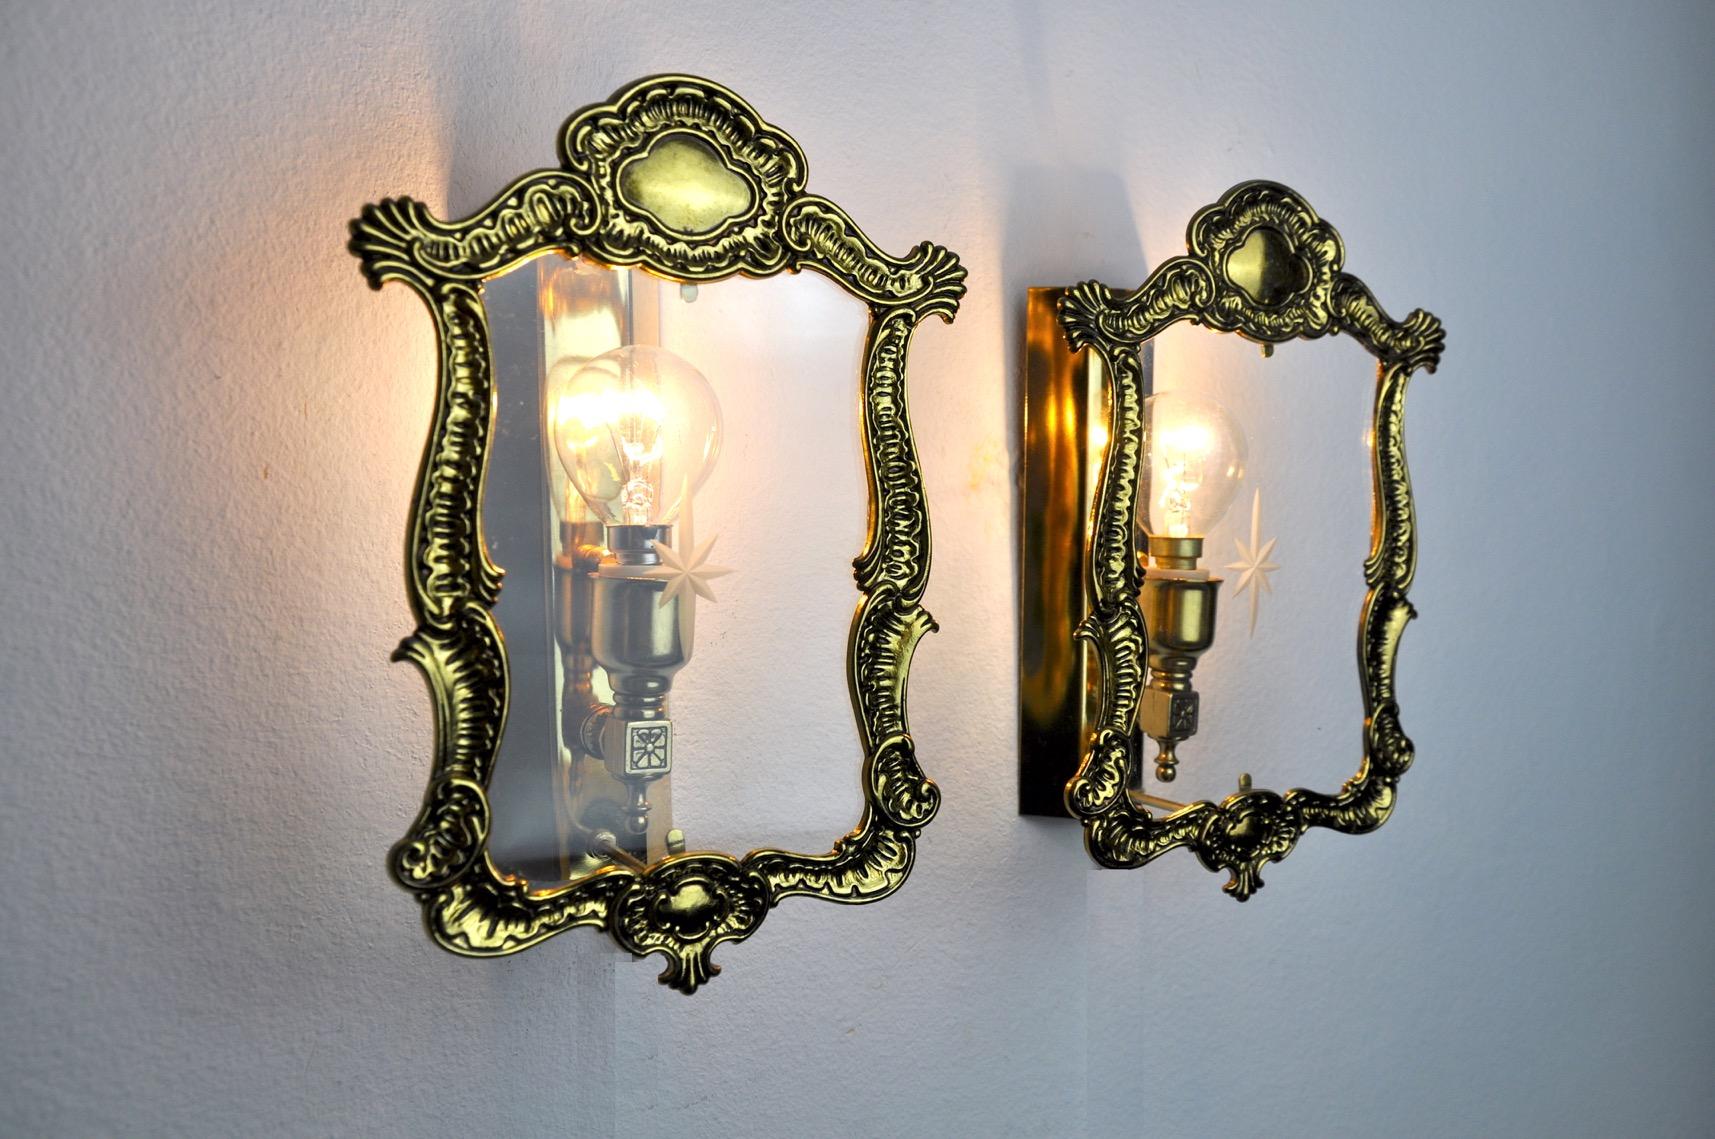 Pair of Regency Sconces, Cut Glass, Italy, 1980 For Sale 1